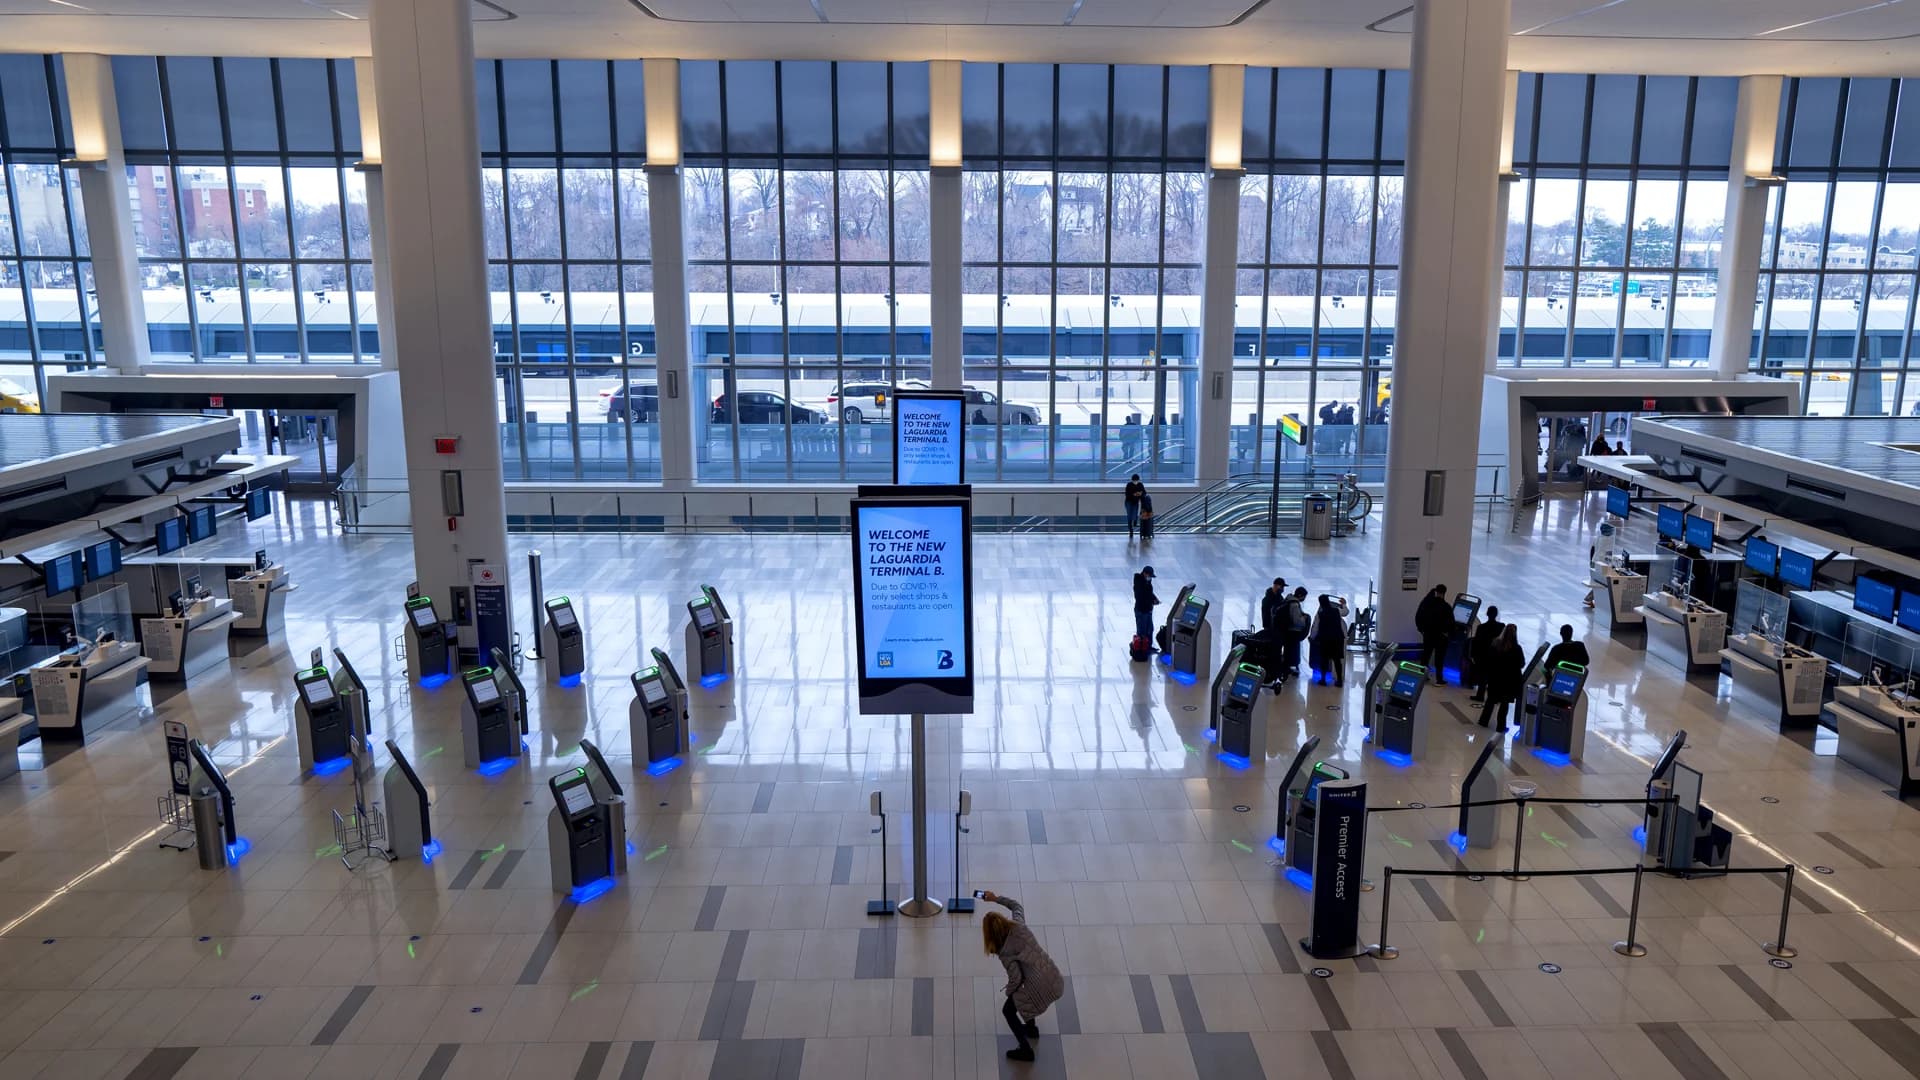 Bottoms up: 4 NYC startups are heading to New York-area airport terminals